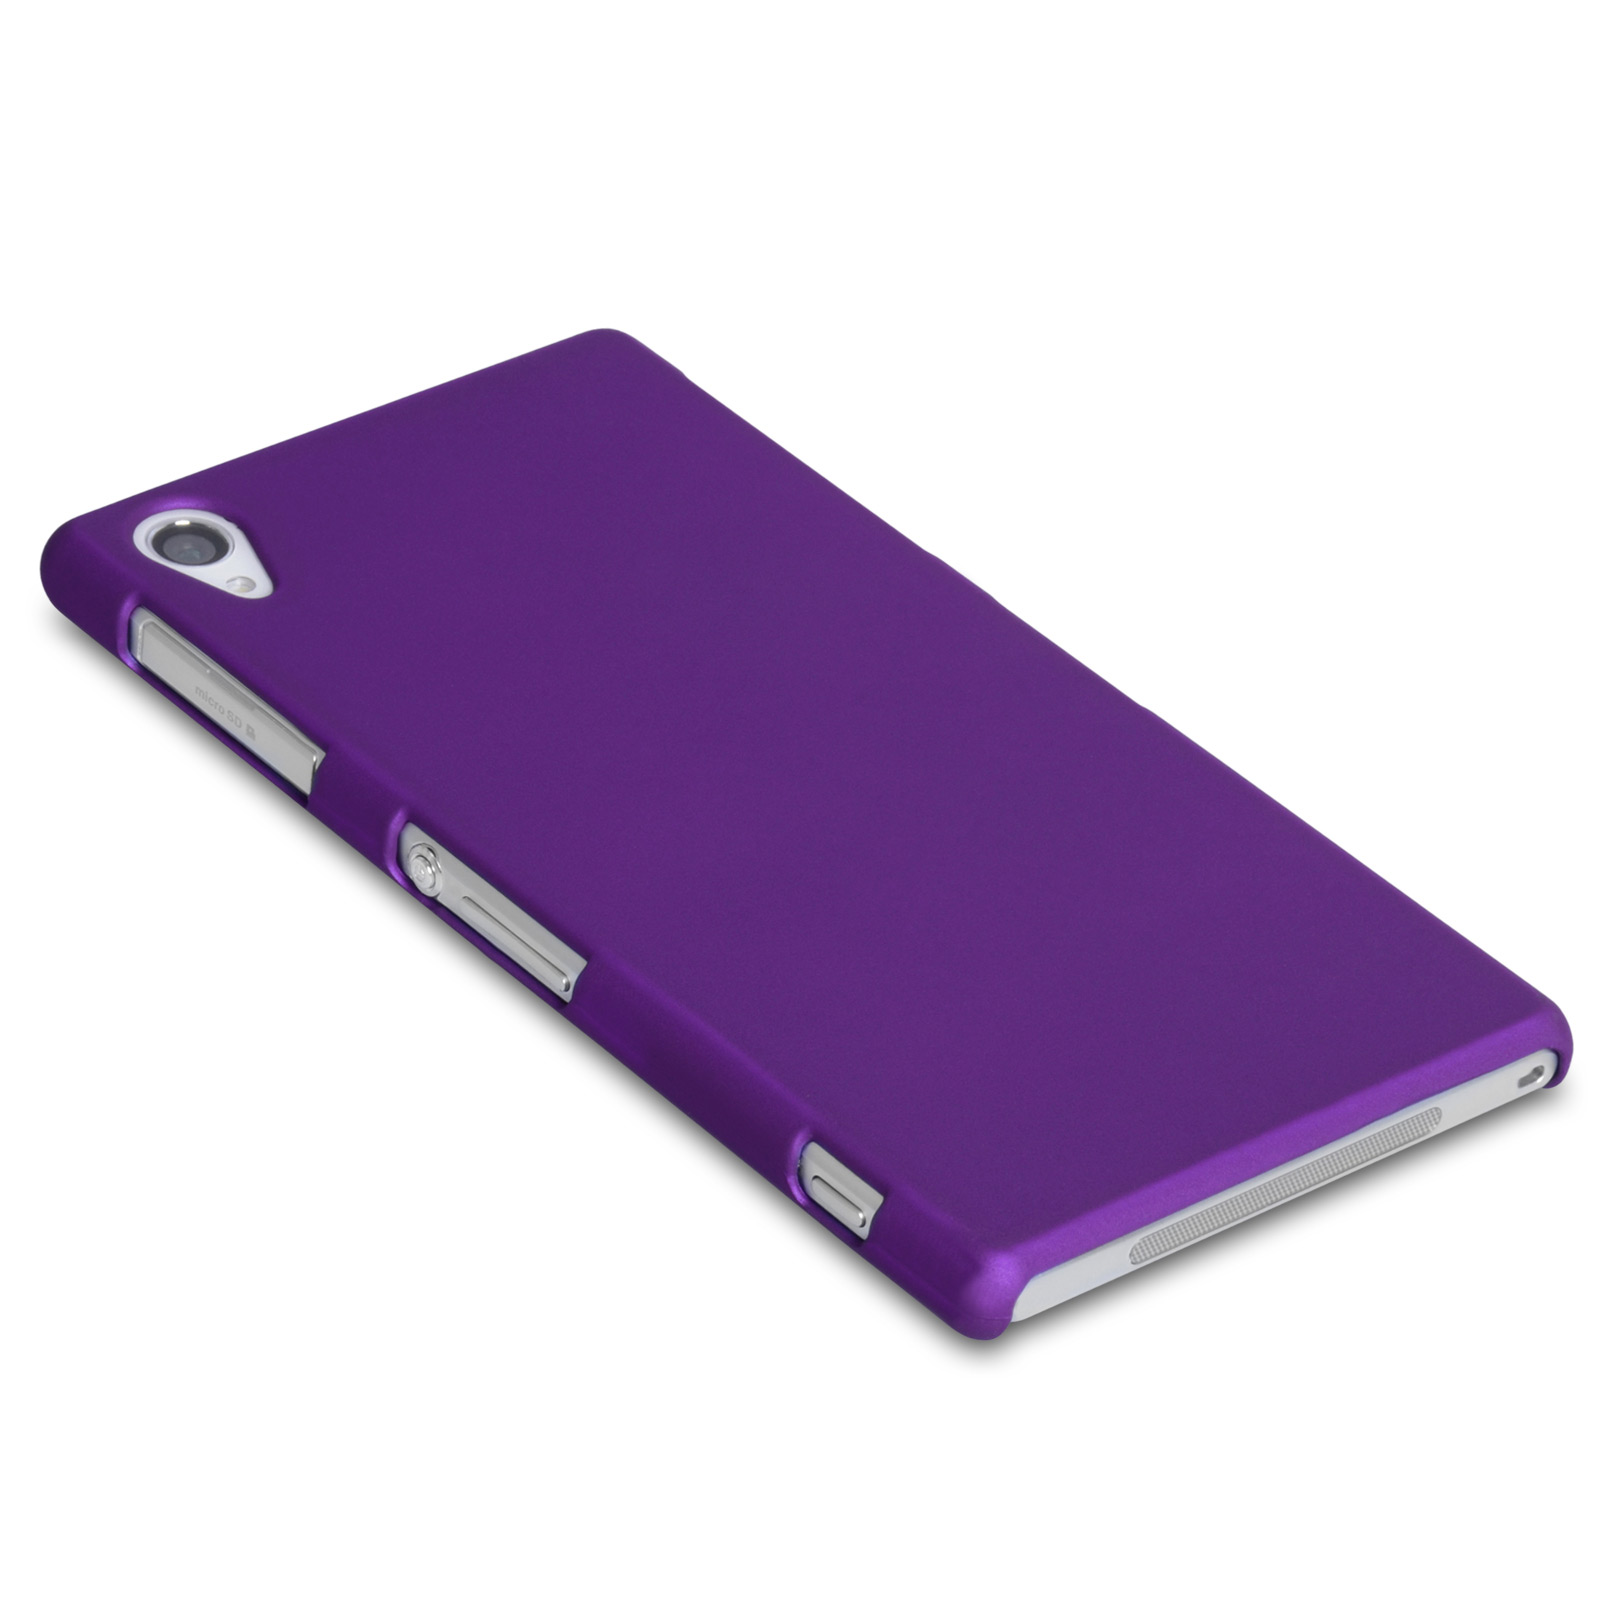 YouSave Accessories Sony Xperia Z2 Hard Hybrid Case - Purple